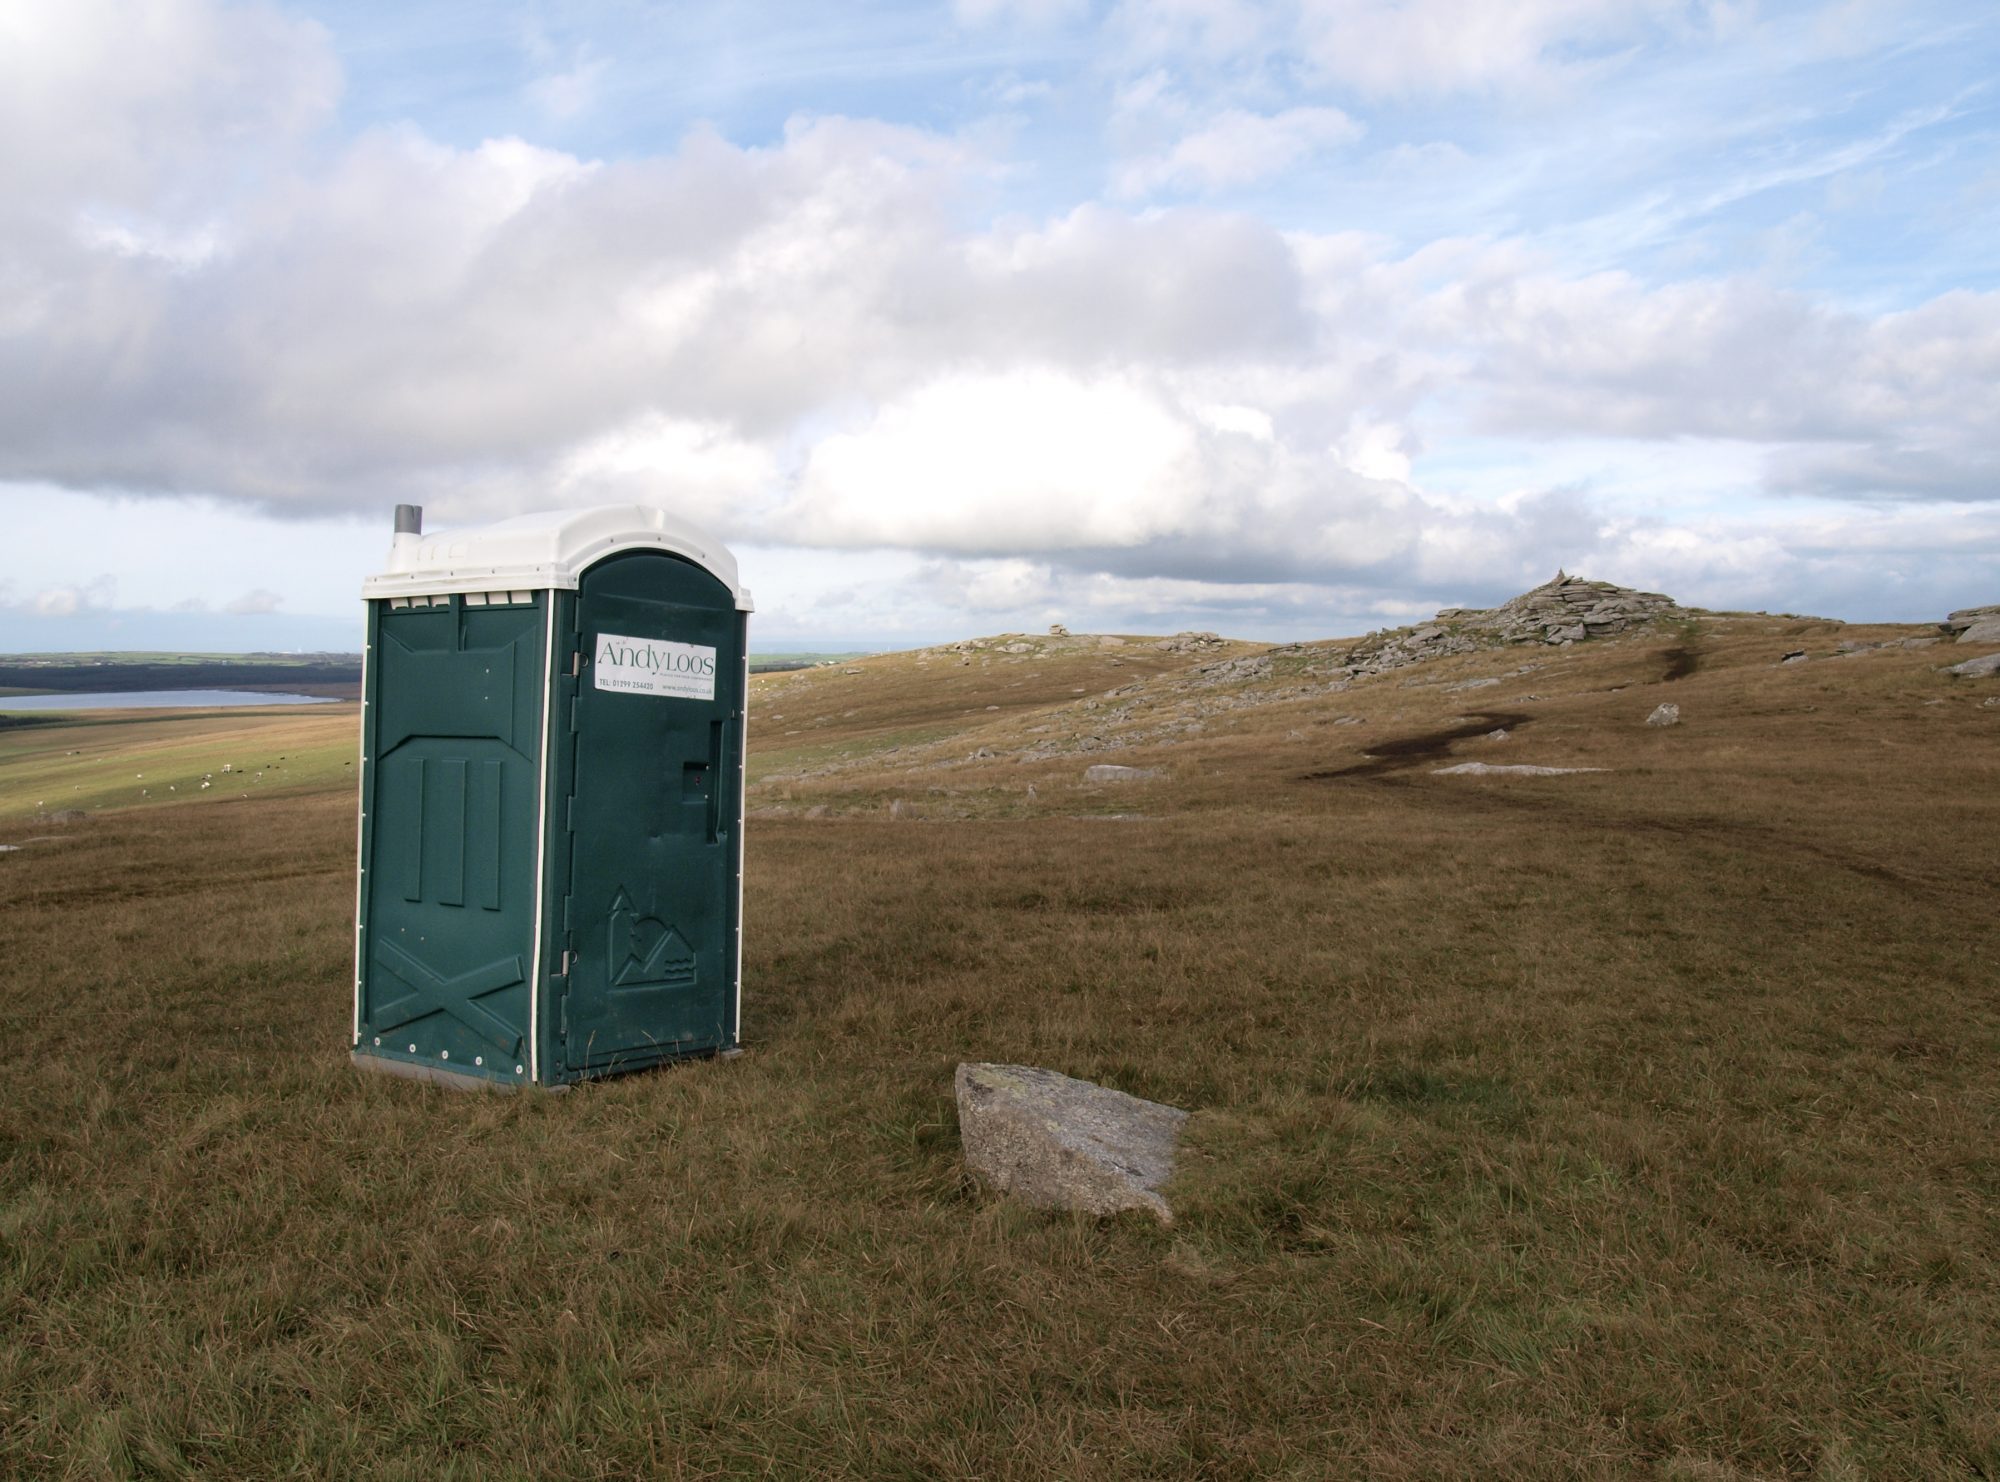 Portaloo in the middle of nowhere on Roughtor, Davidstow, Bodmin Moor, Cornwall